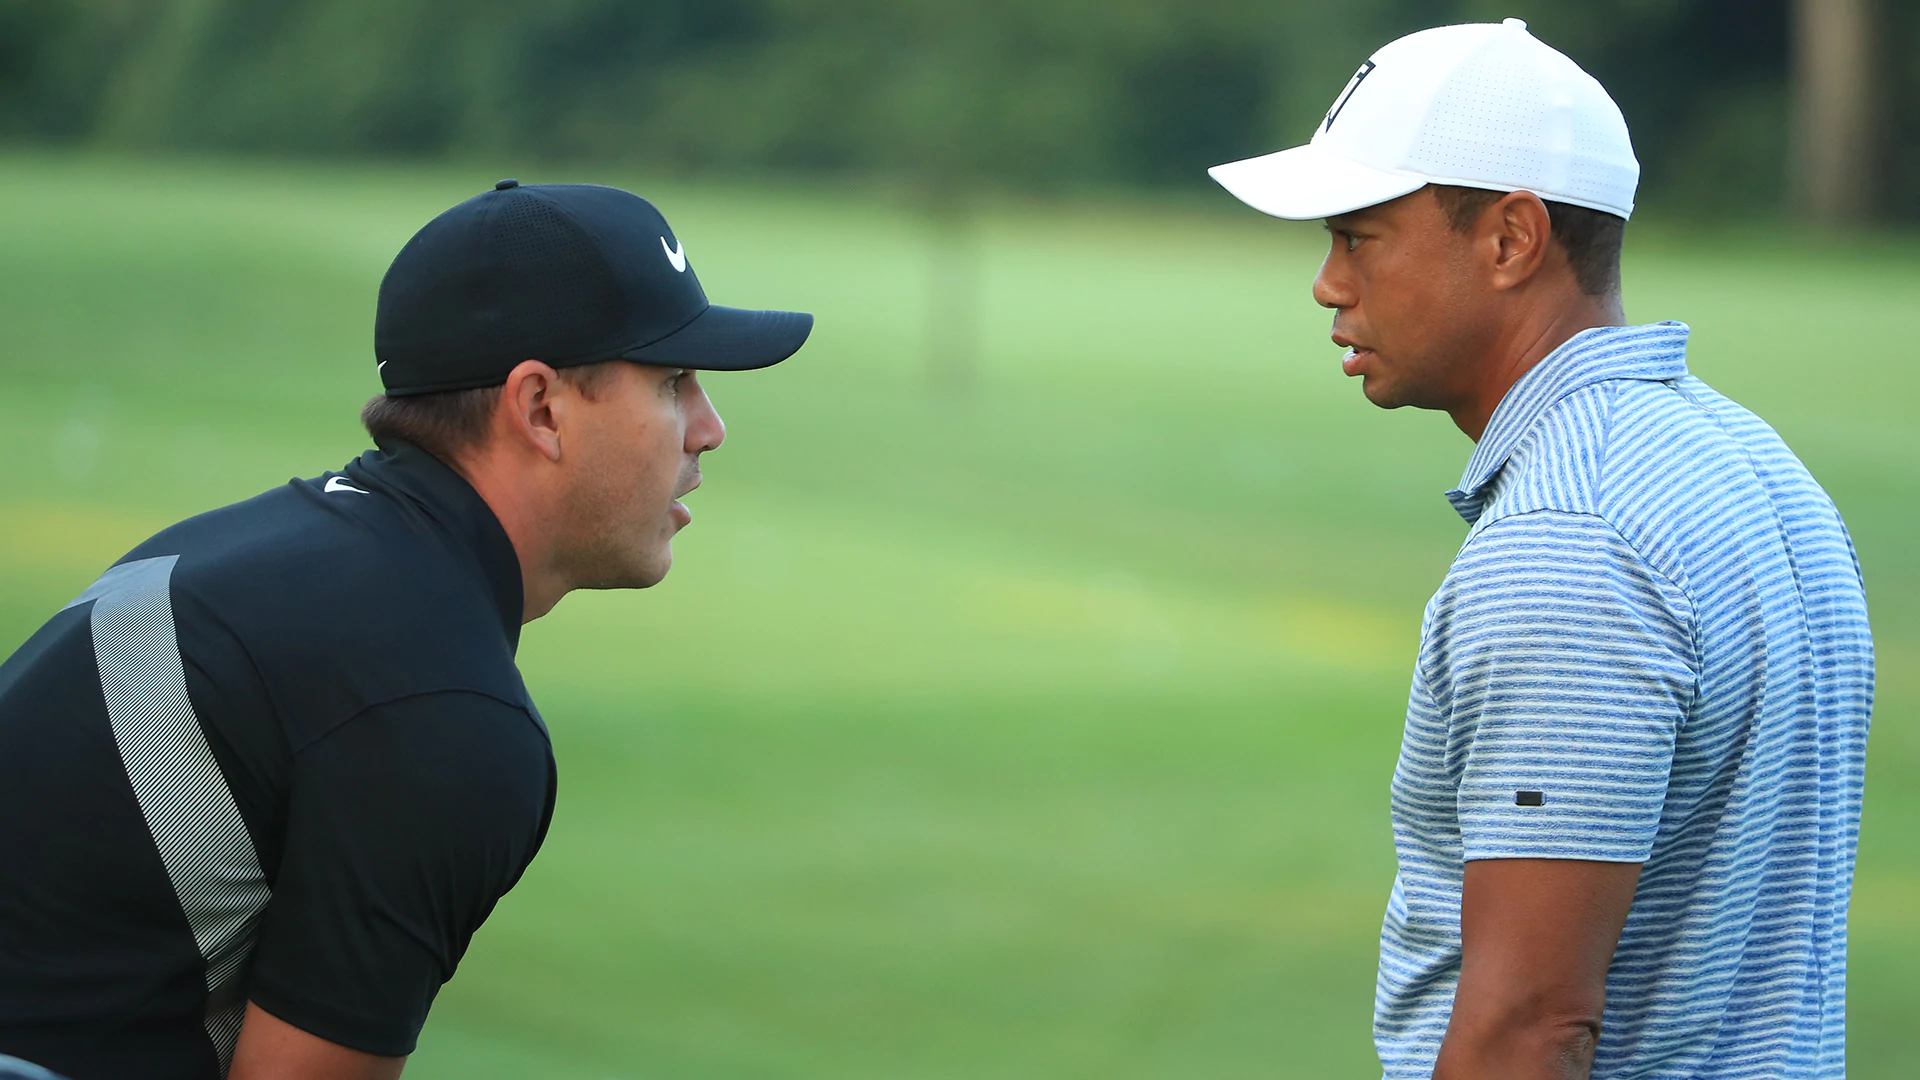 Memorial featured groups: Brooks Koepka with Tiger and Rory, not Bryson 4